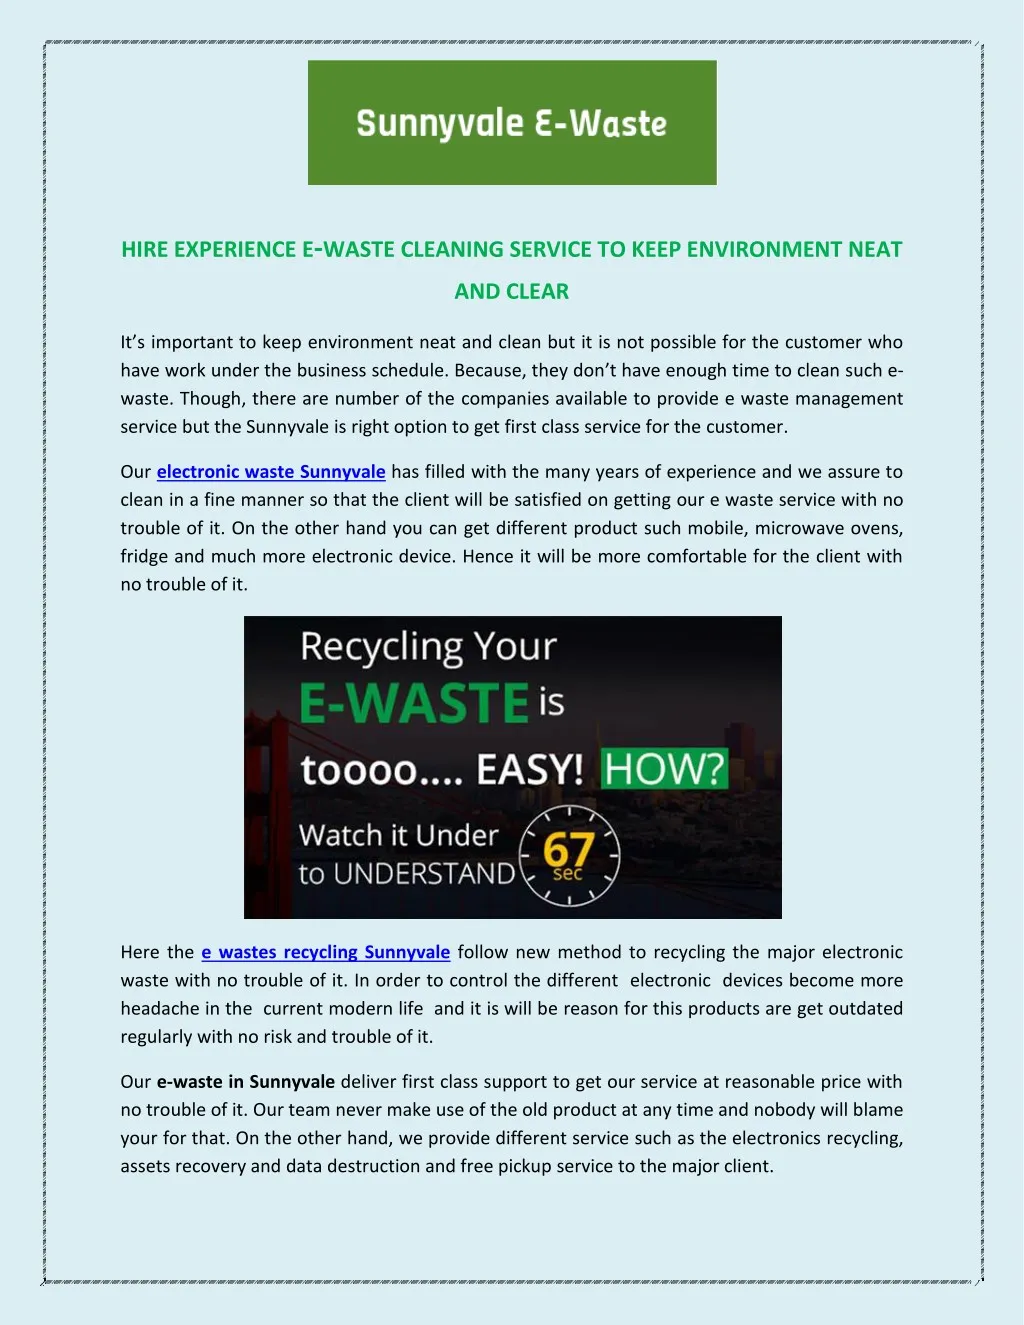 hire experience e waste cleaning service to keep